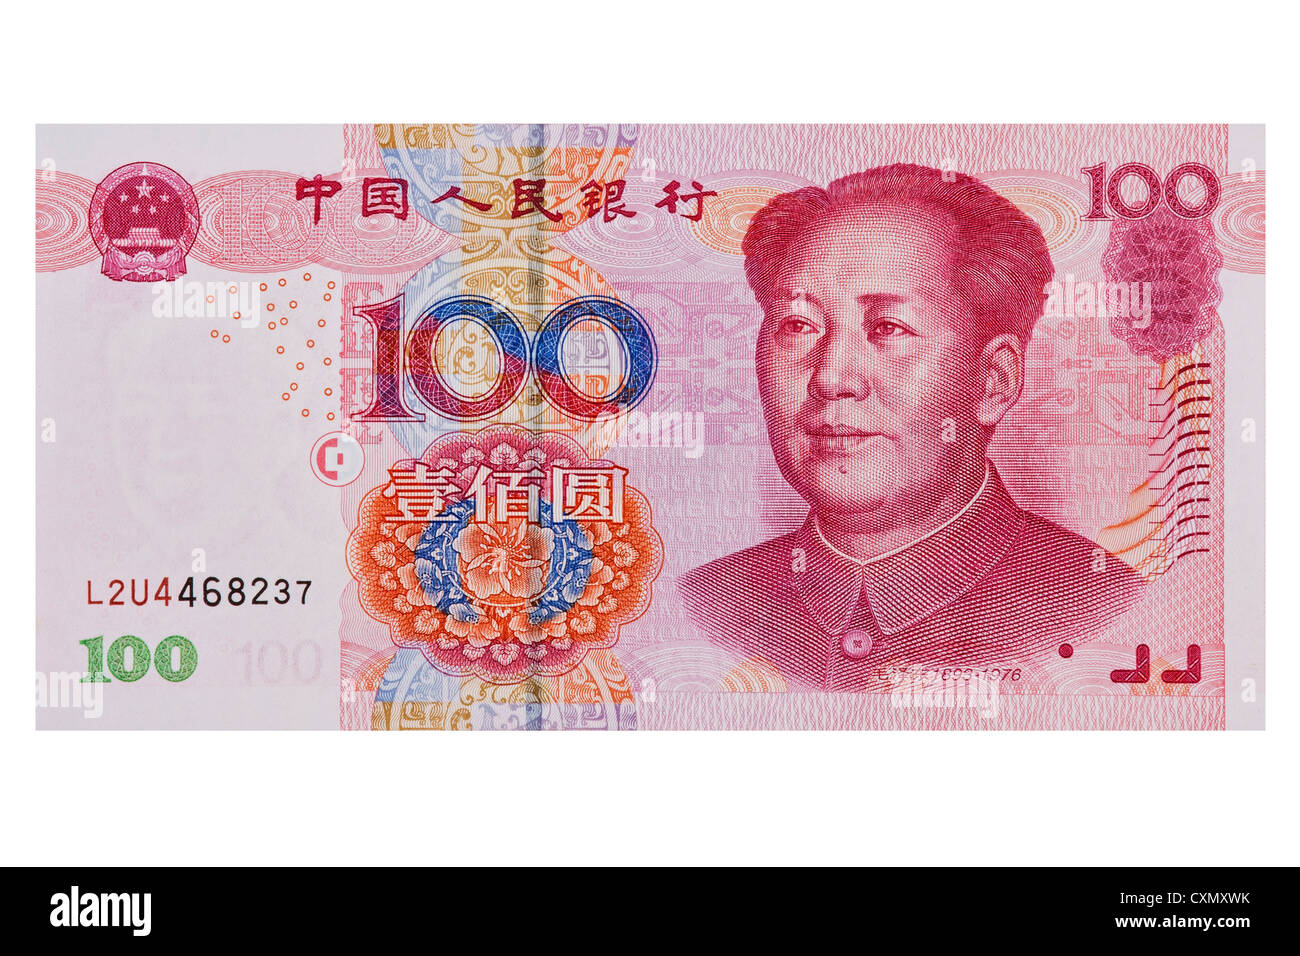 Yuan China Money 100 Stock Photos Yuan China Money 100 Stock - chinese 100 rmb or yuan featuring chairman mao on the front of each bill stock